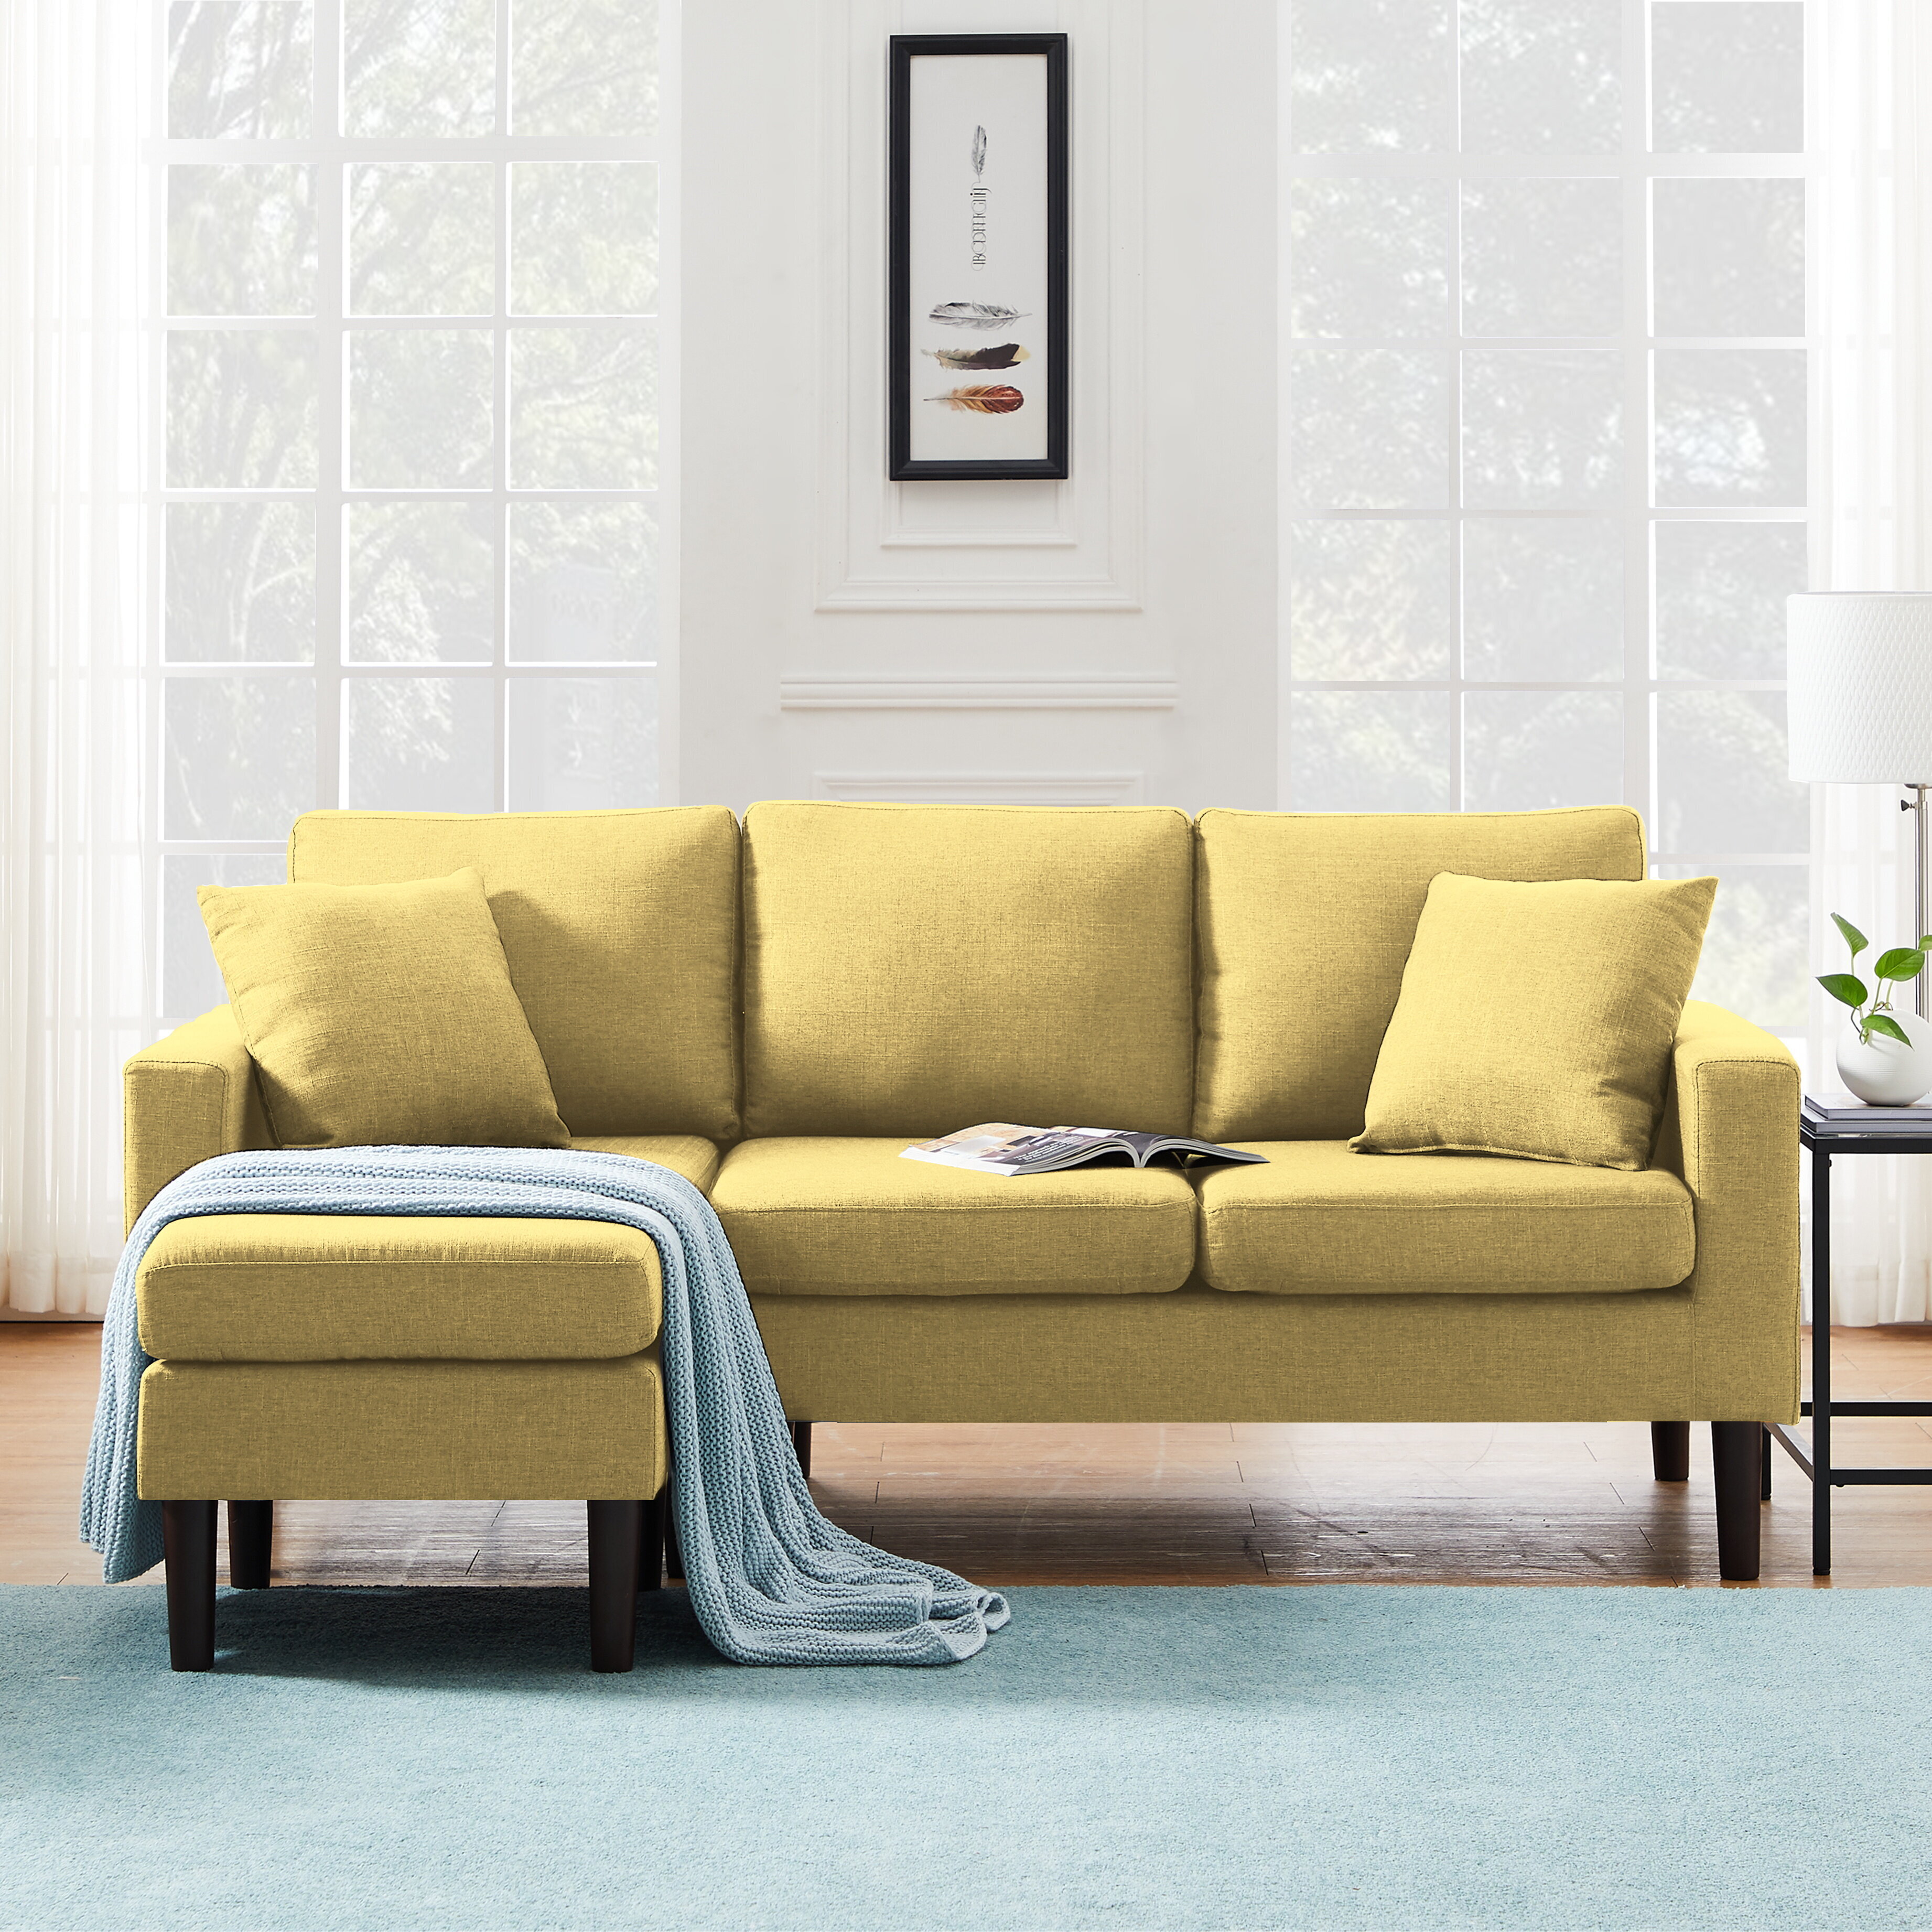 Very small couch with a solid pop of color